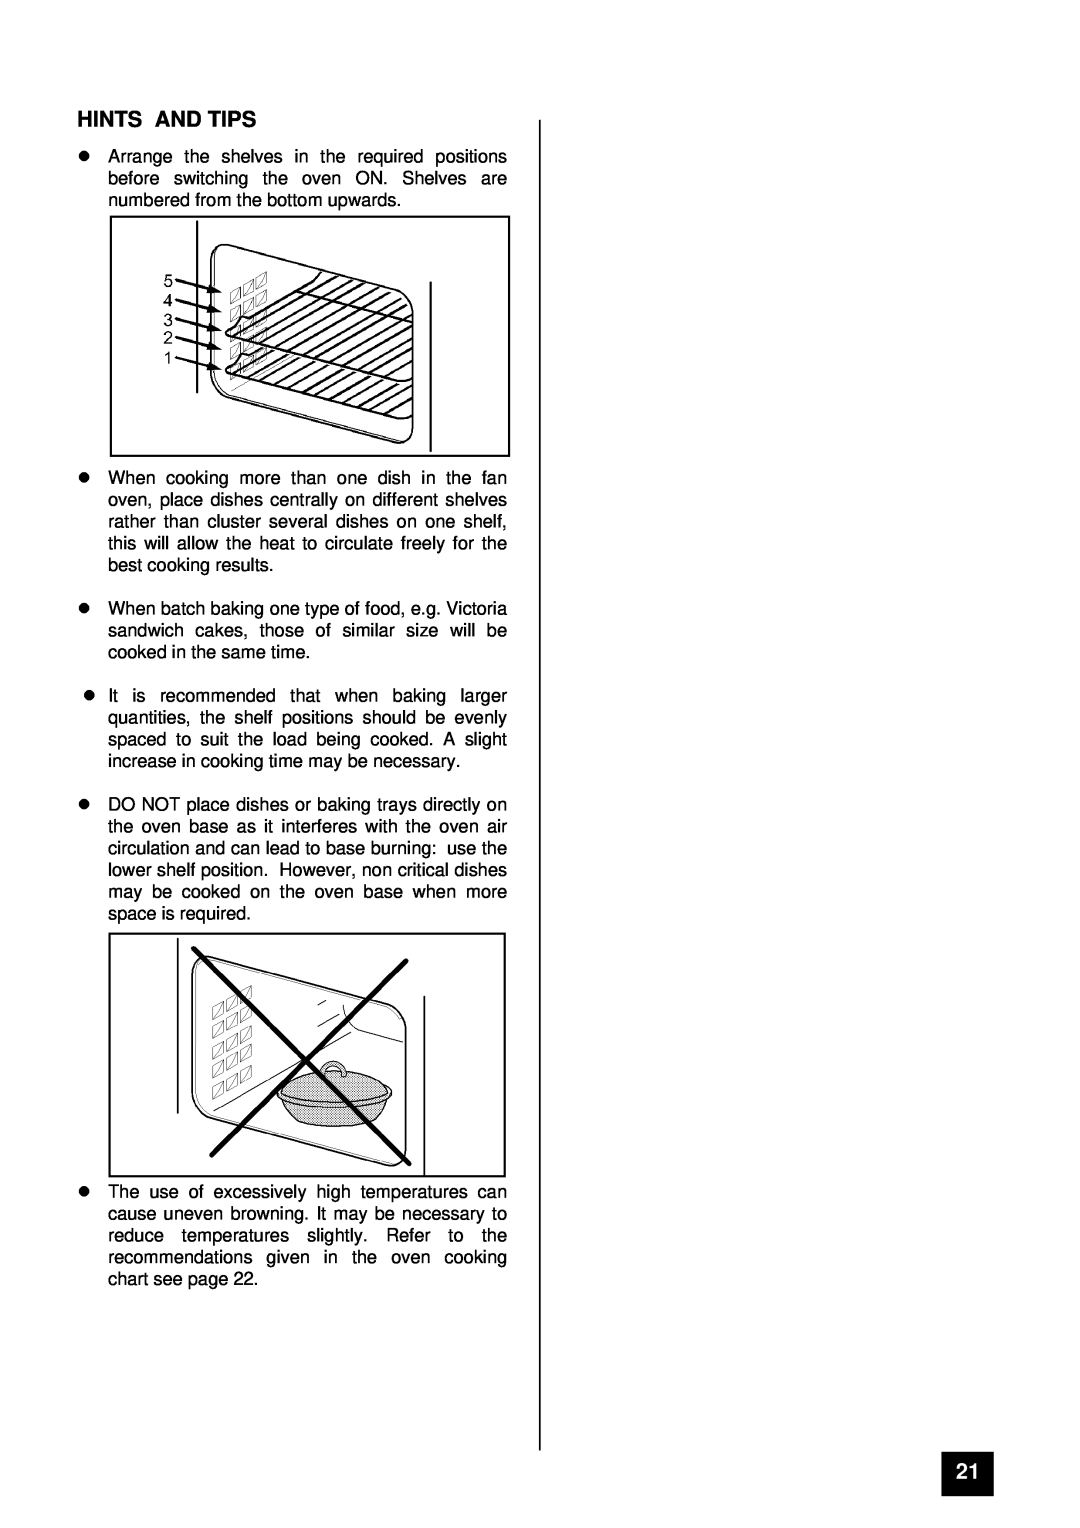 Tricity Bendix SIE 505 installation instructions lHINTS AND TIPS, lincrease in cooking time may be necessary 